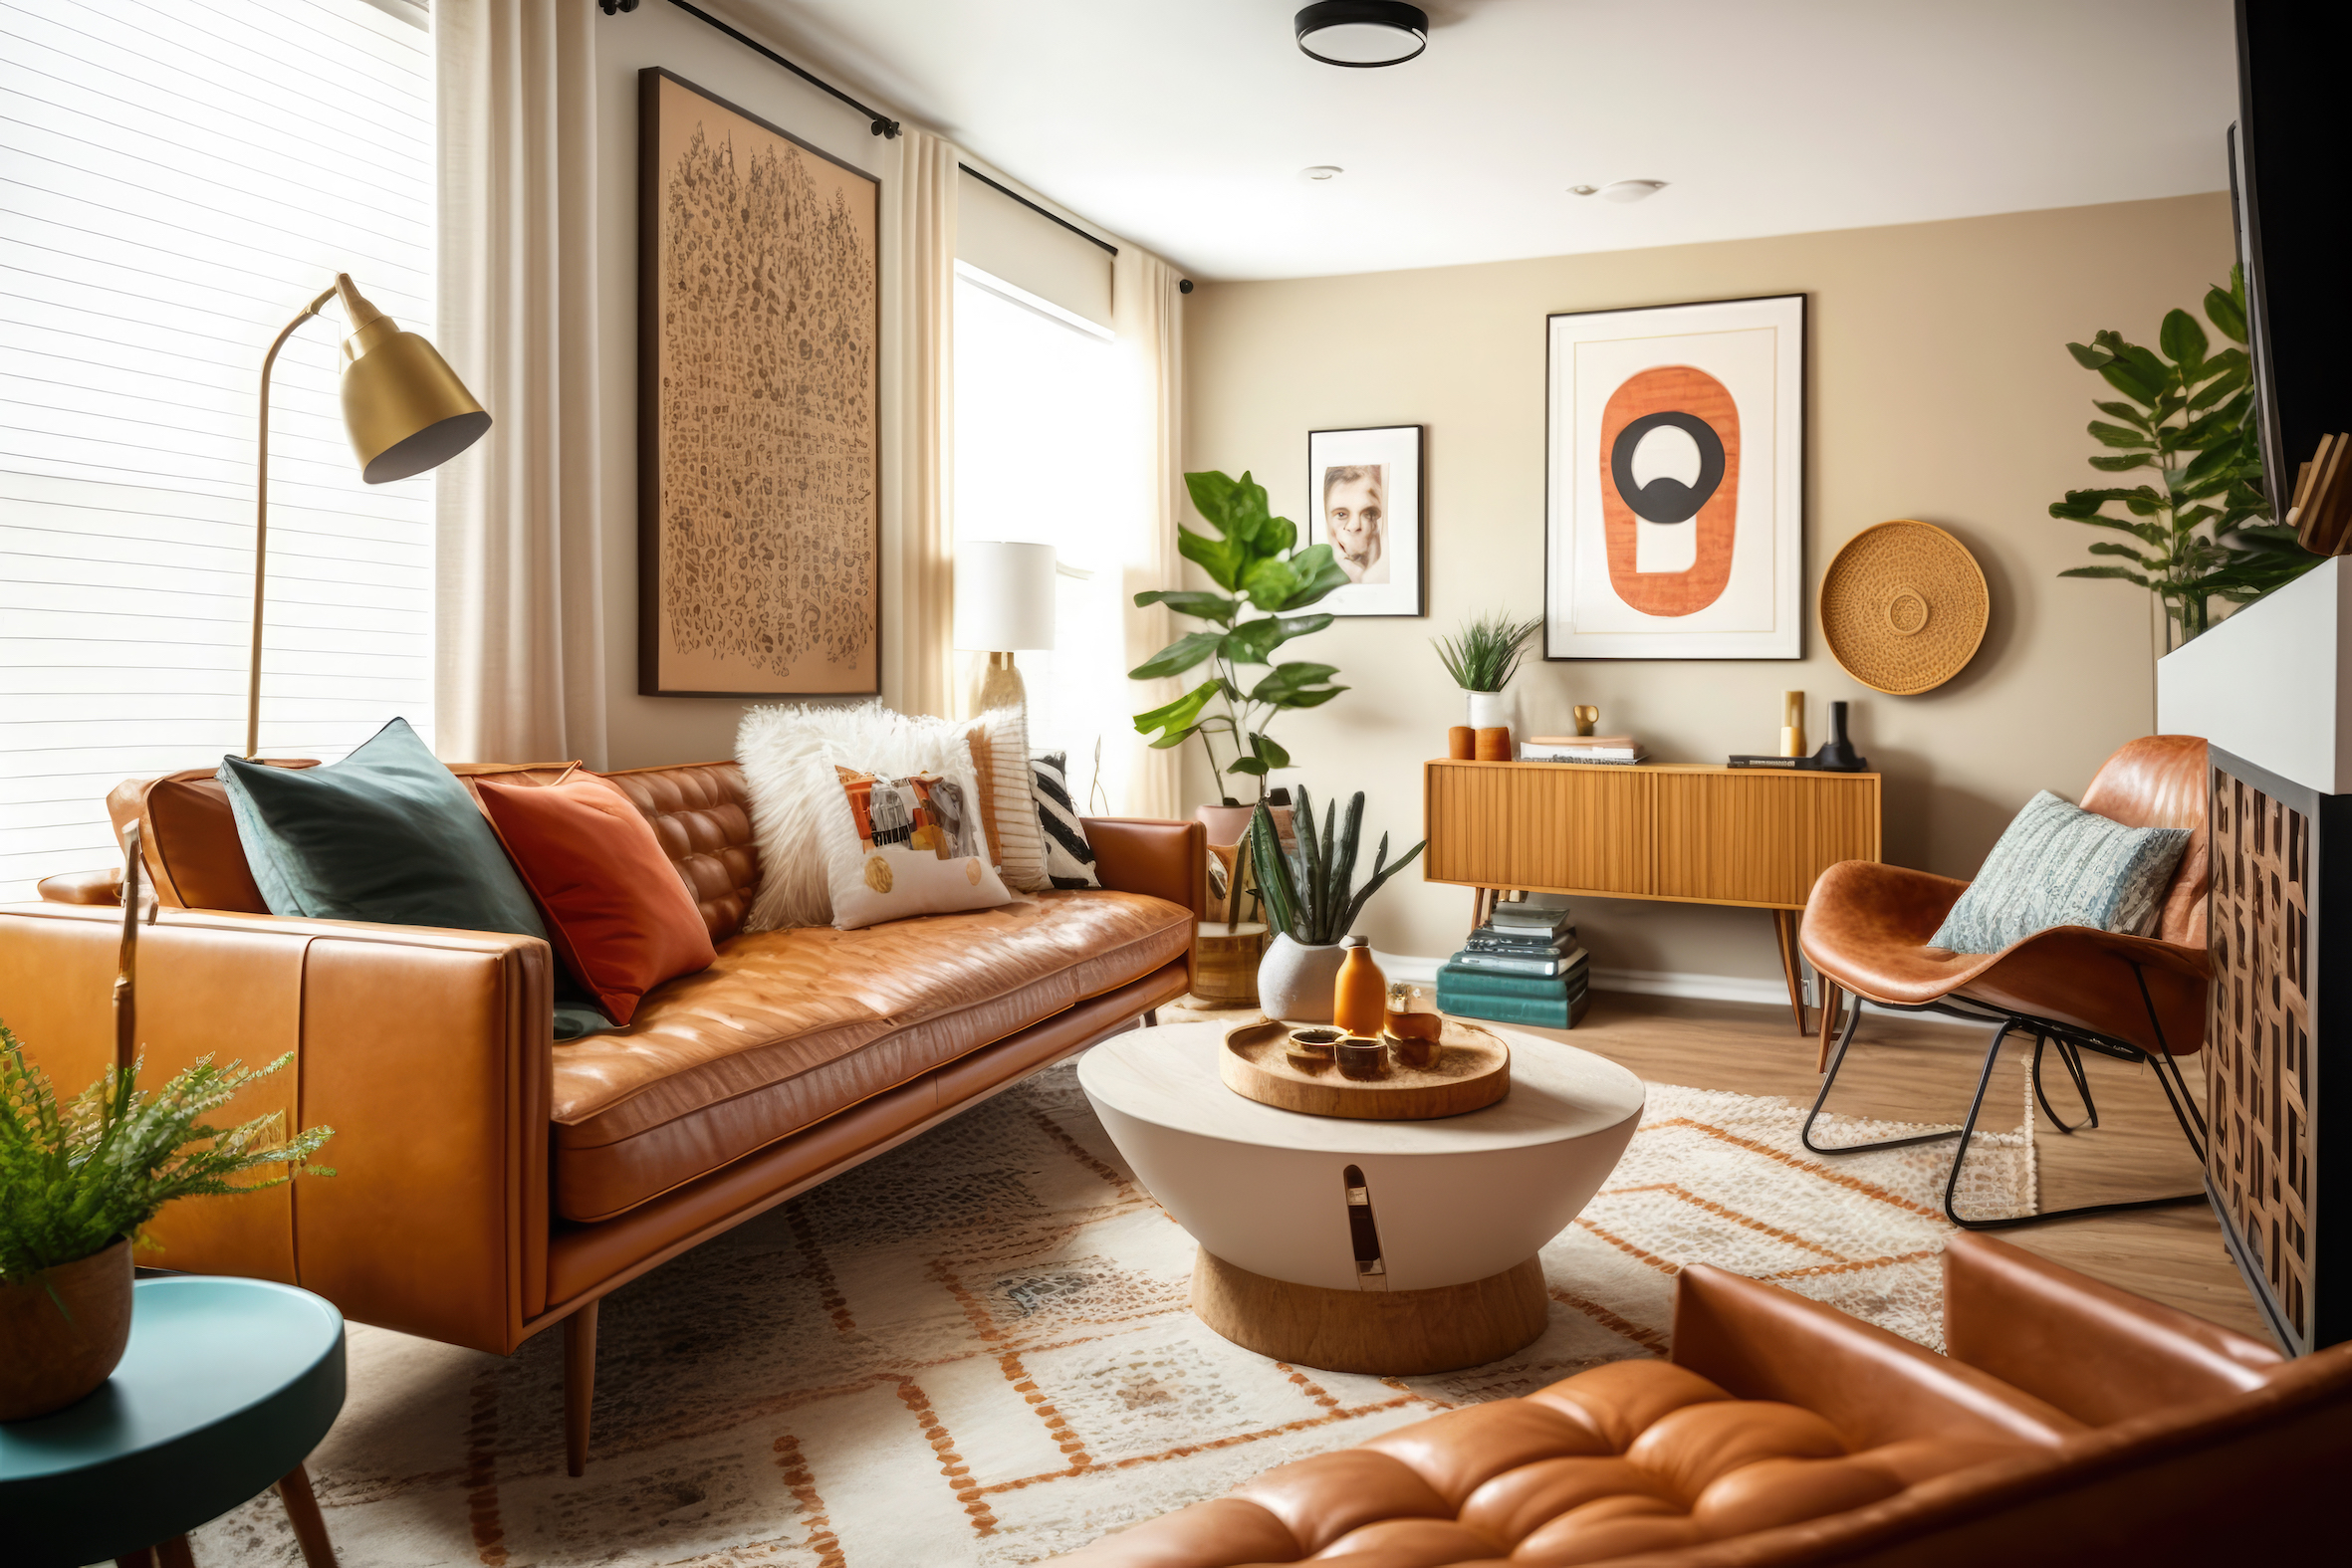 living room Mid Century style with warm colors